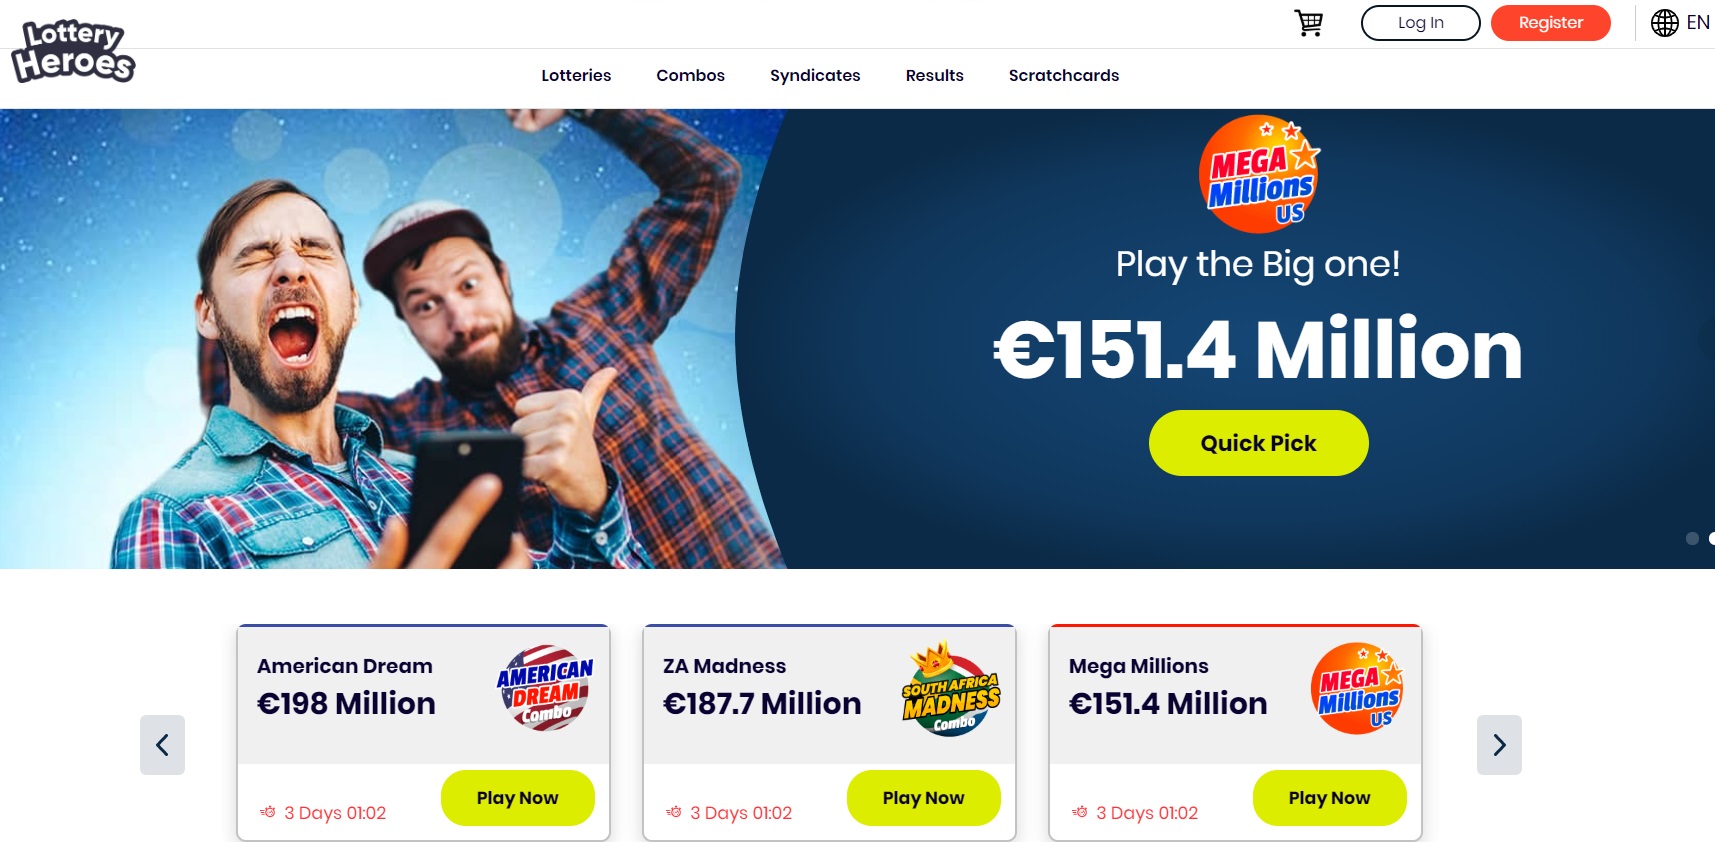 Lottery Heroes digital platform is a revolution to lottery industry